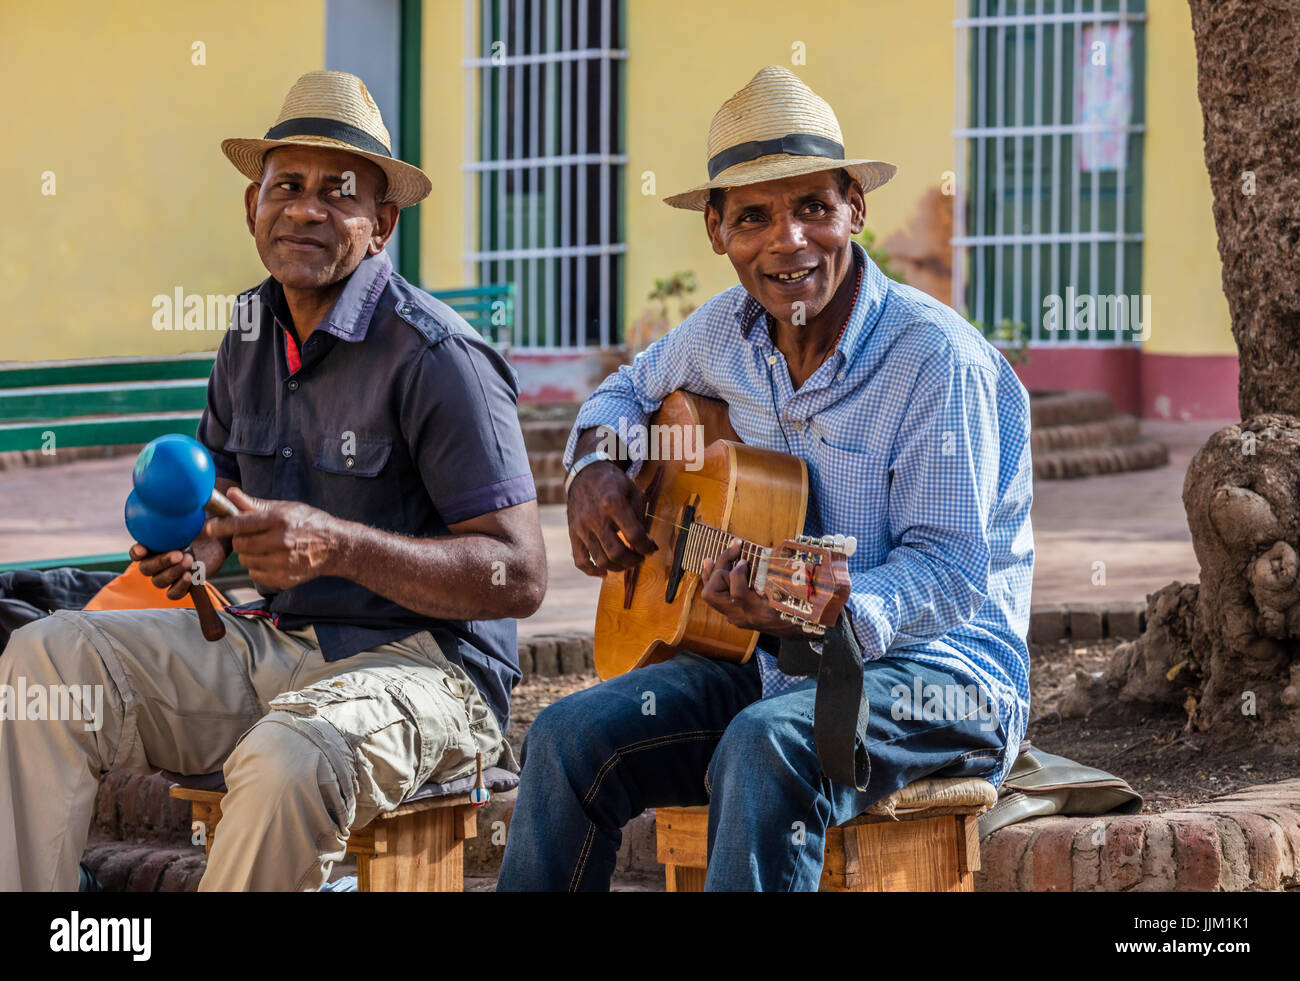 A CUBAN band plays traditional music in a courtyard - TRINIDAD, CUBA Stock Photo